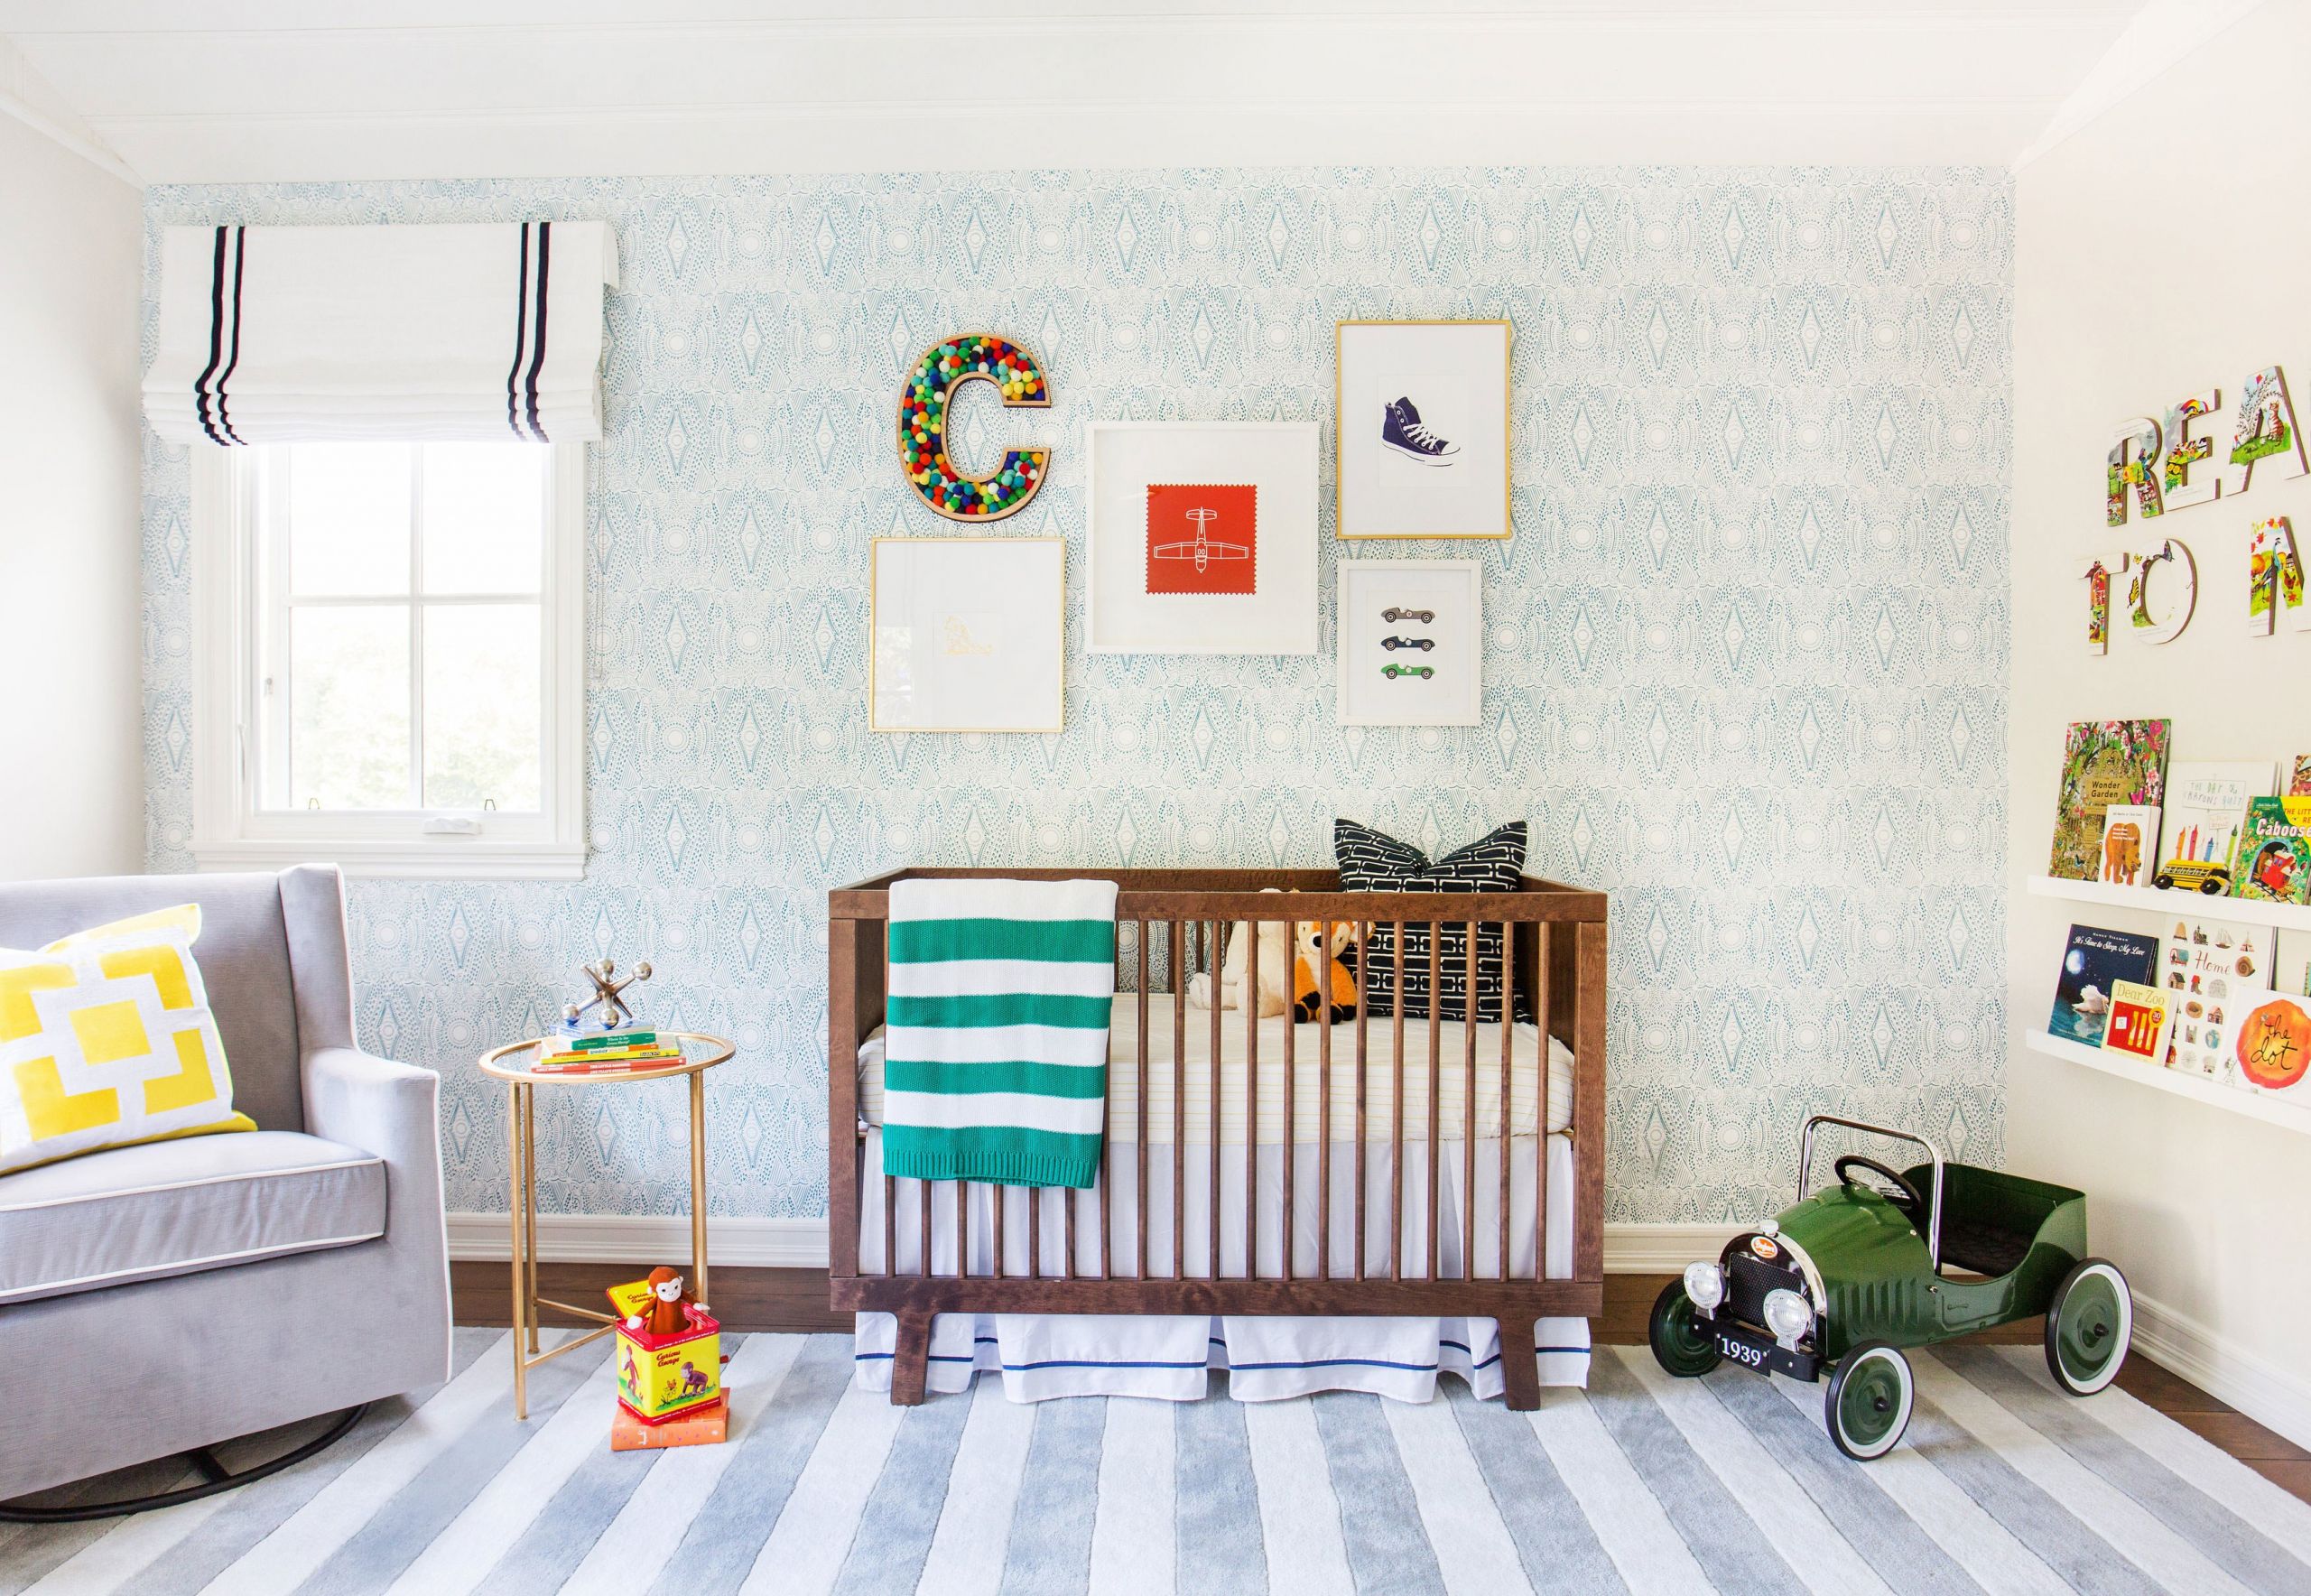 Kids Room Wall Design
 3 Wall Decor Ideas Perfect for Kids’ Rooms s